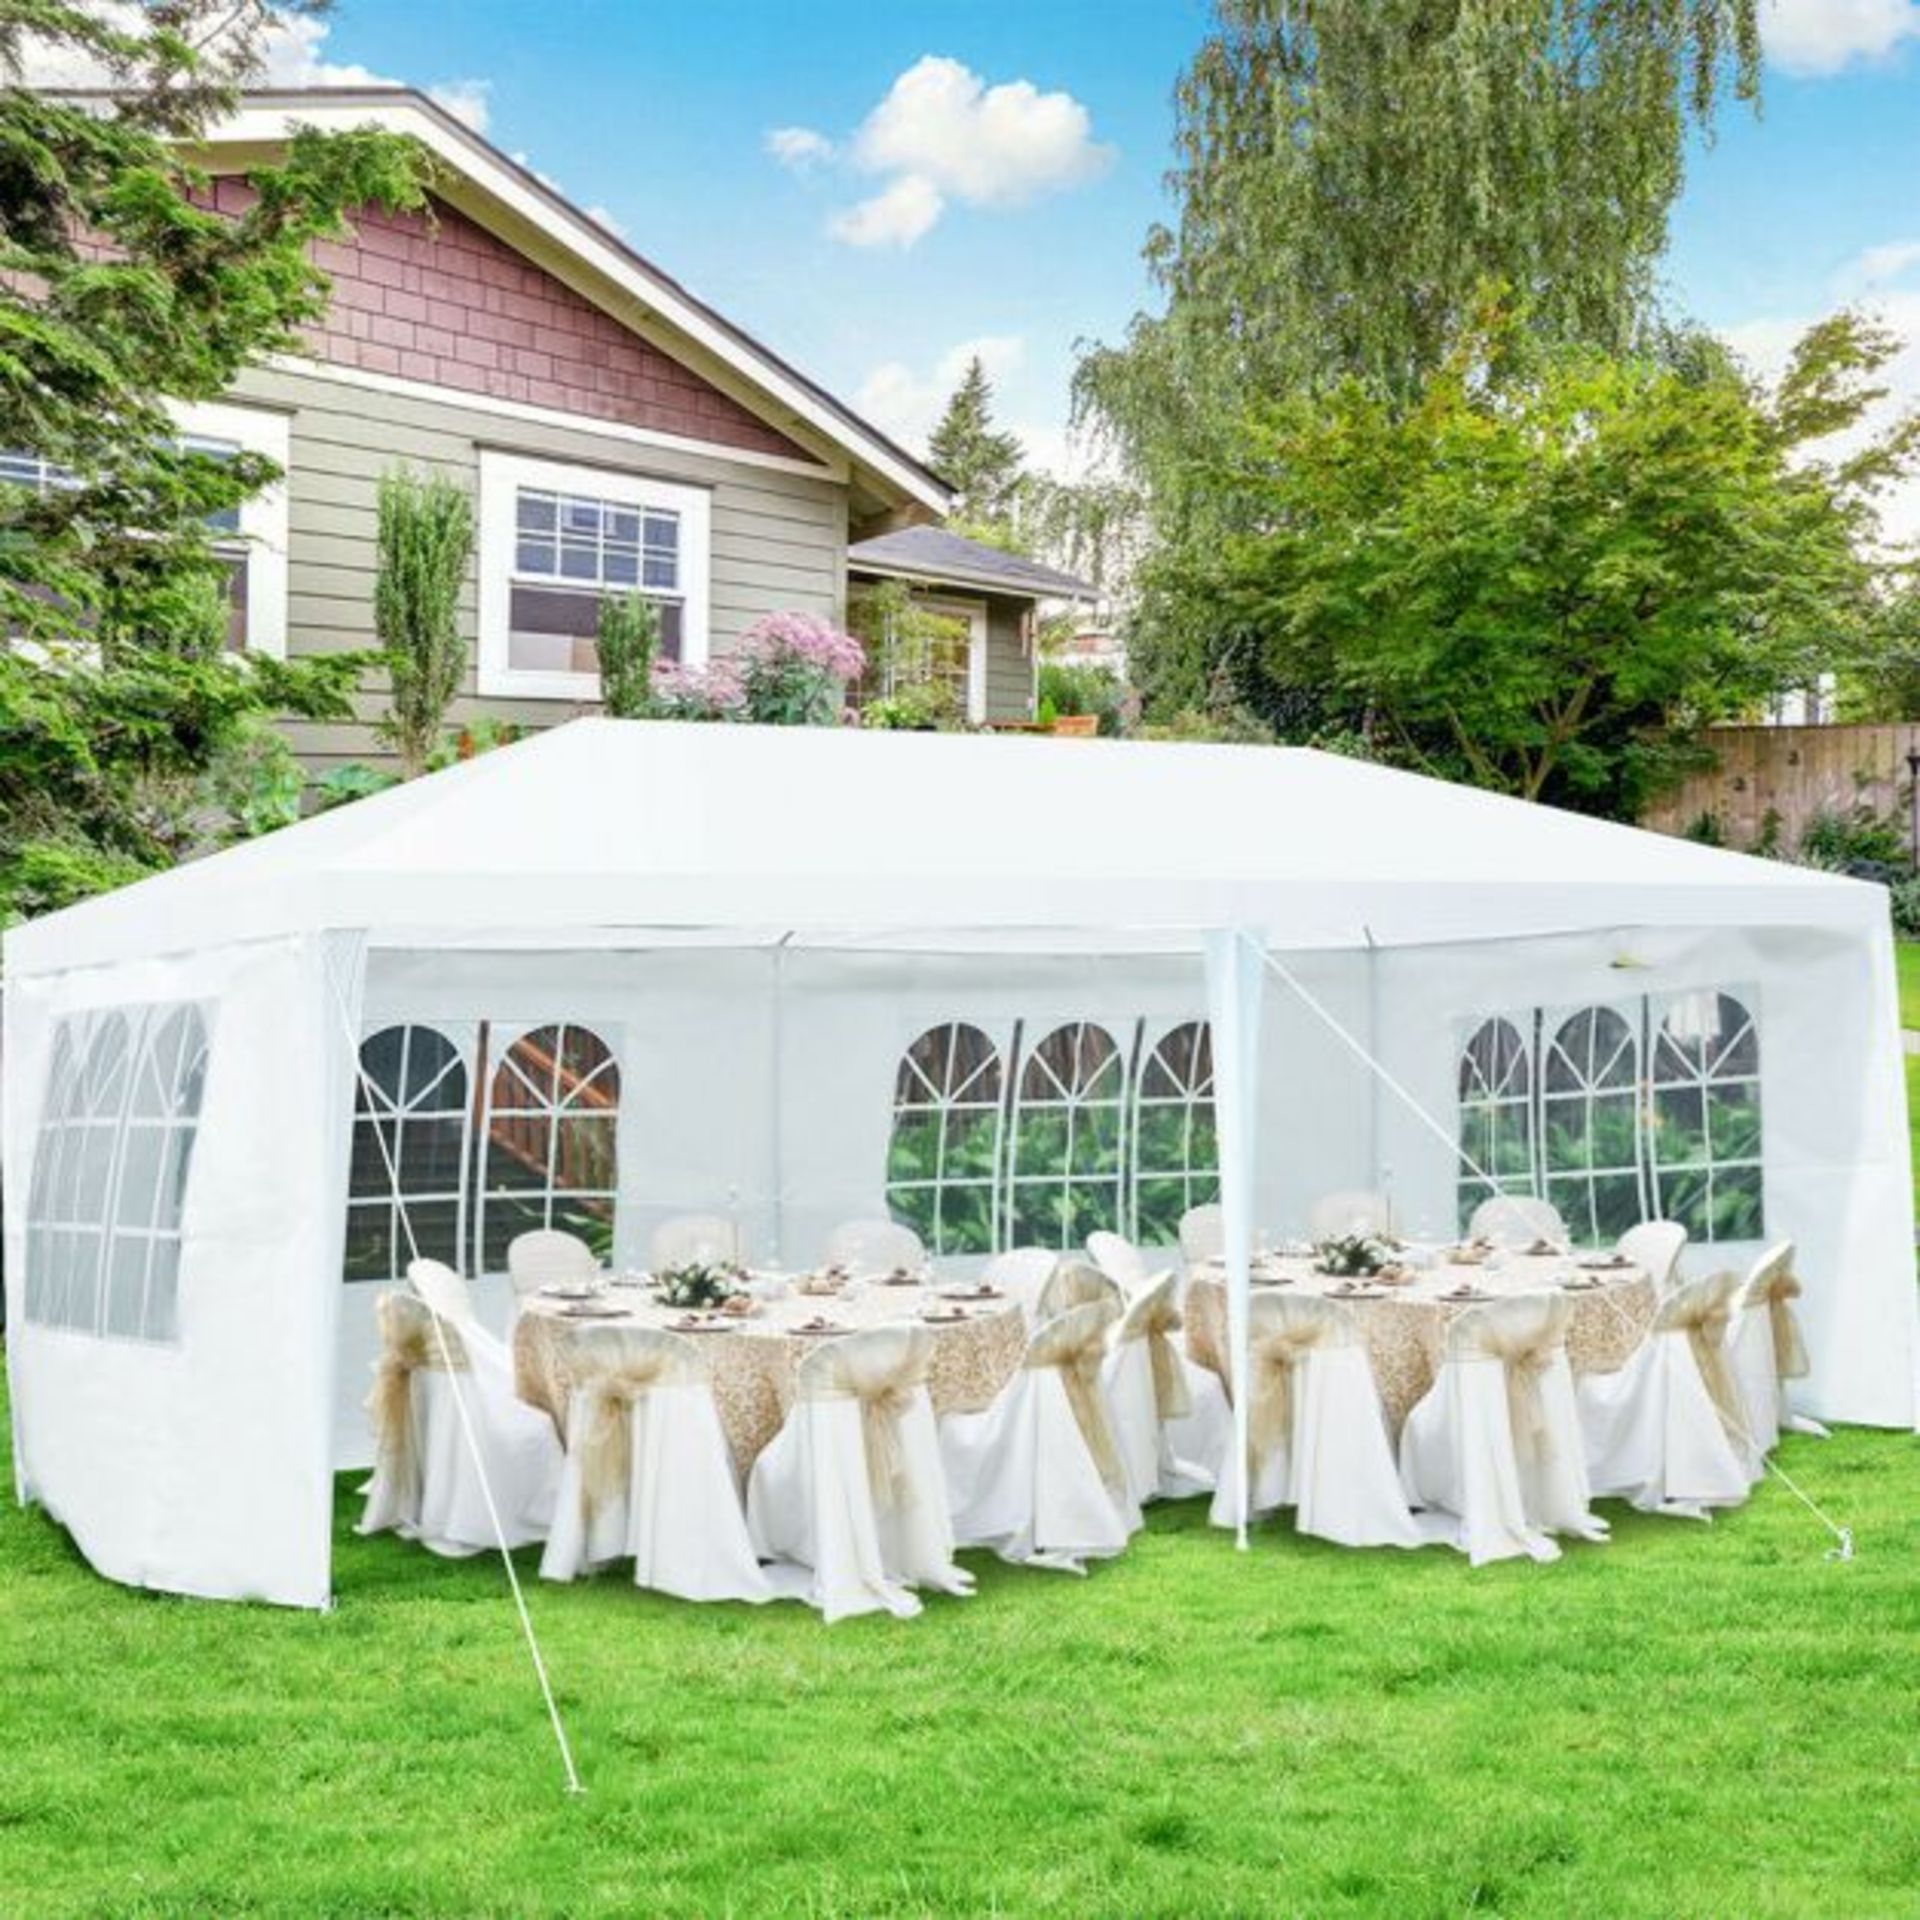 3 m x 6 m Garden Gazebo Party Canopy Tent Waterproof. - SR37. The frame of the tent is constructed